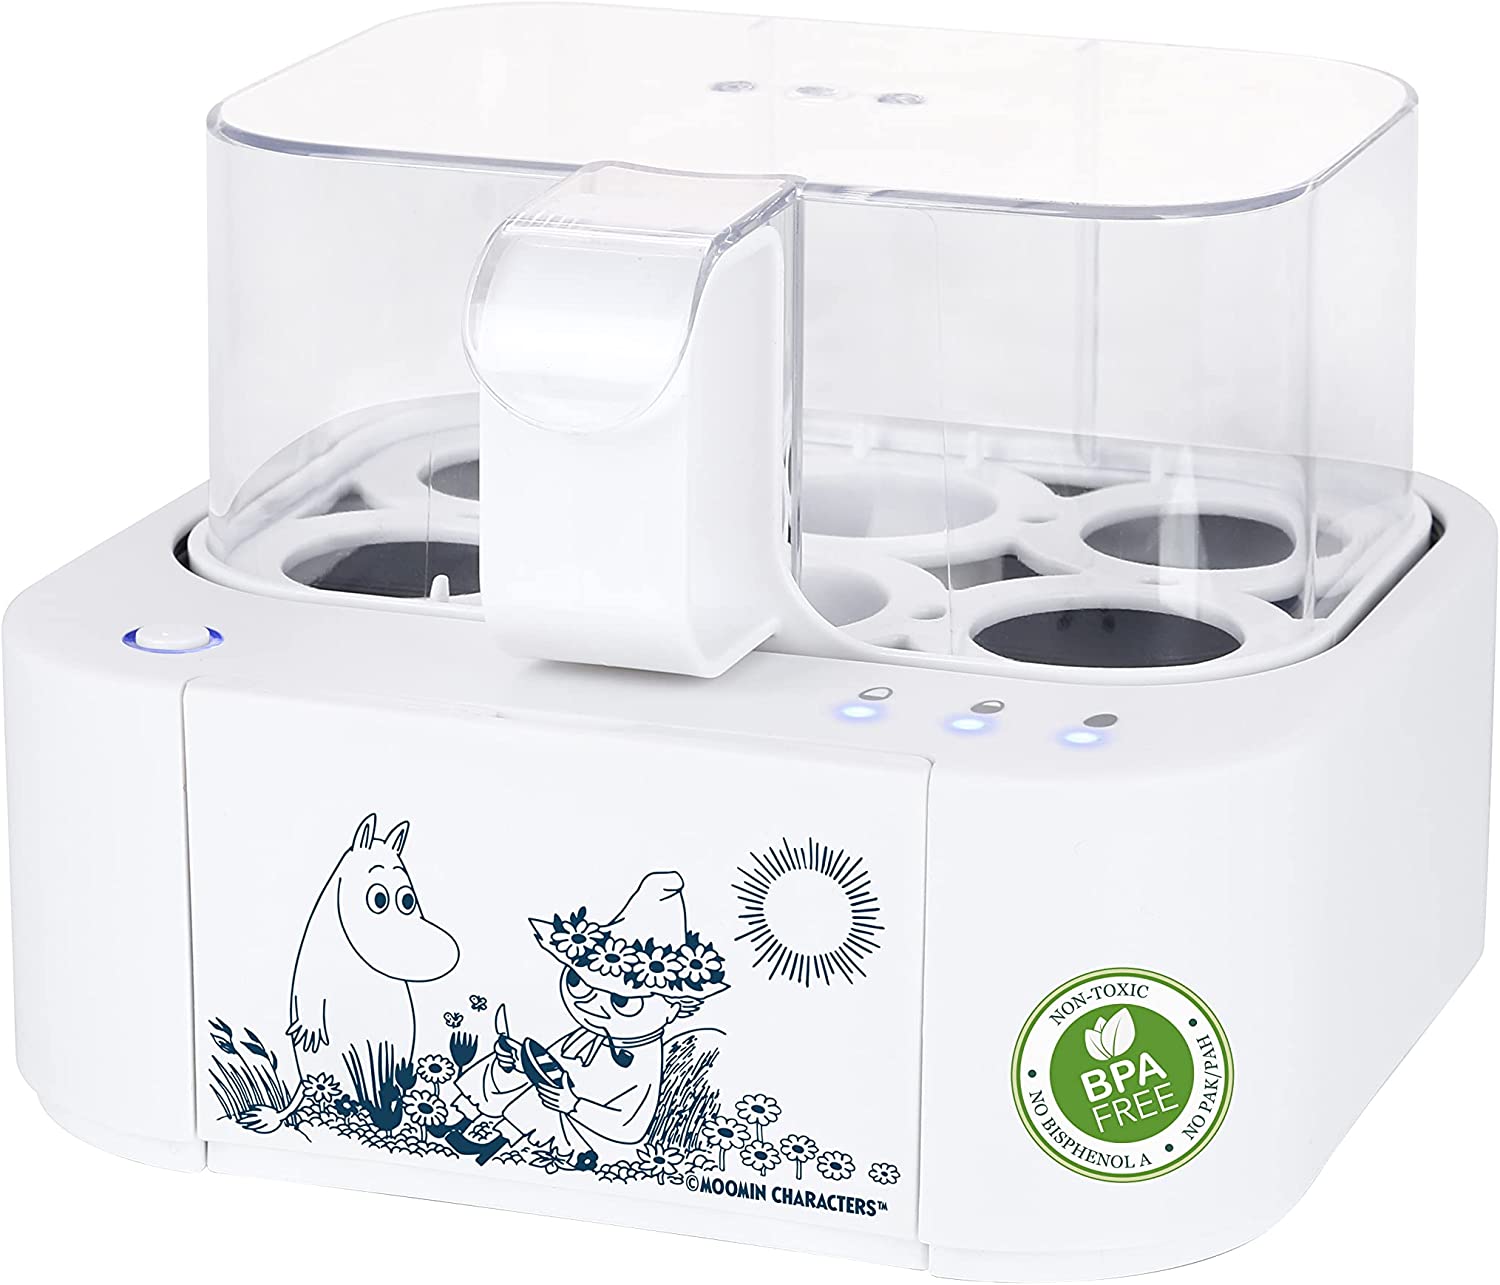 Moomin Fully Automatic Electric Egg Cooker Boils All Three Cooking Levels [Soft | Medium | Hard] In Just One Cooking Process With Perfect Results and Voice Output in 5 Languages ​​(DE/EN/NL/FI/SE-FI)